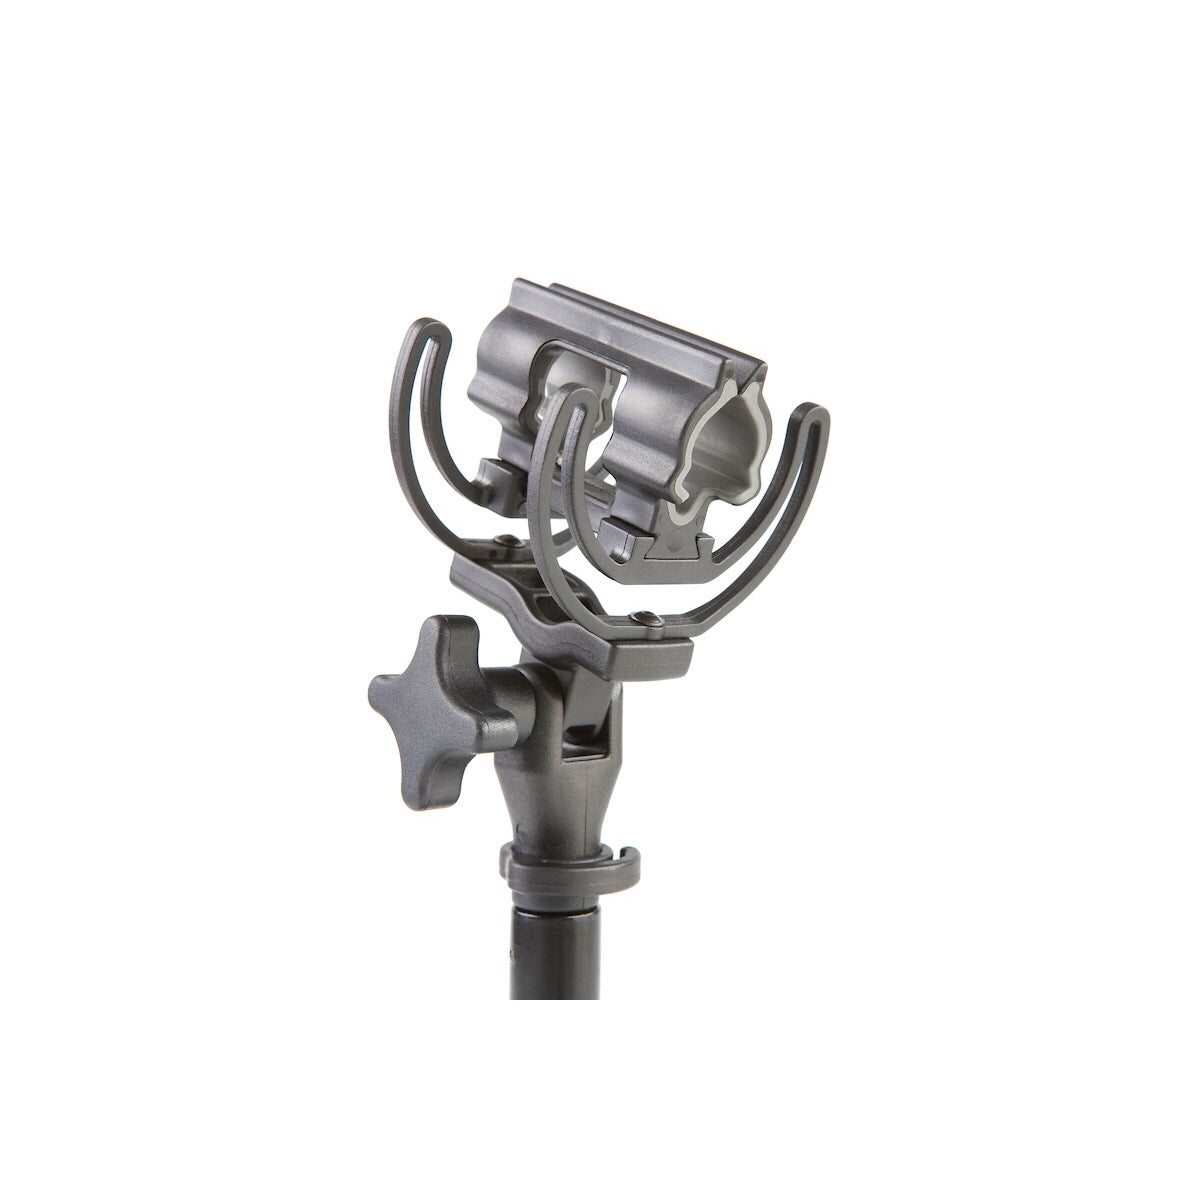 Rycote InVision INV 7HG MKIII Shock Mount, For 19-34mm Diameter Mics